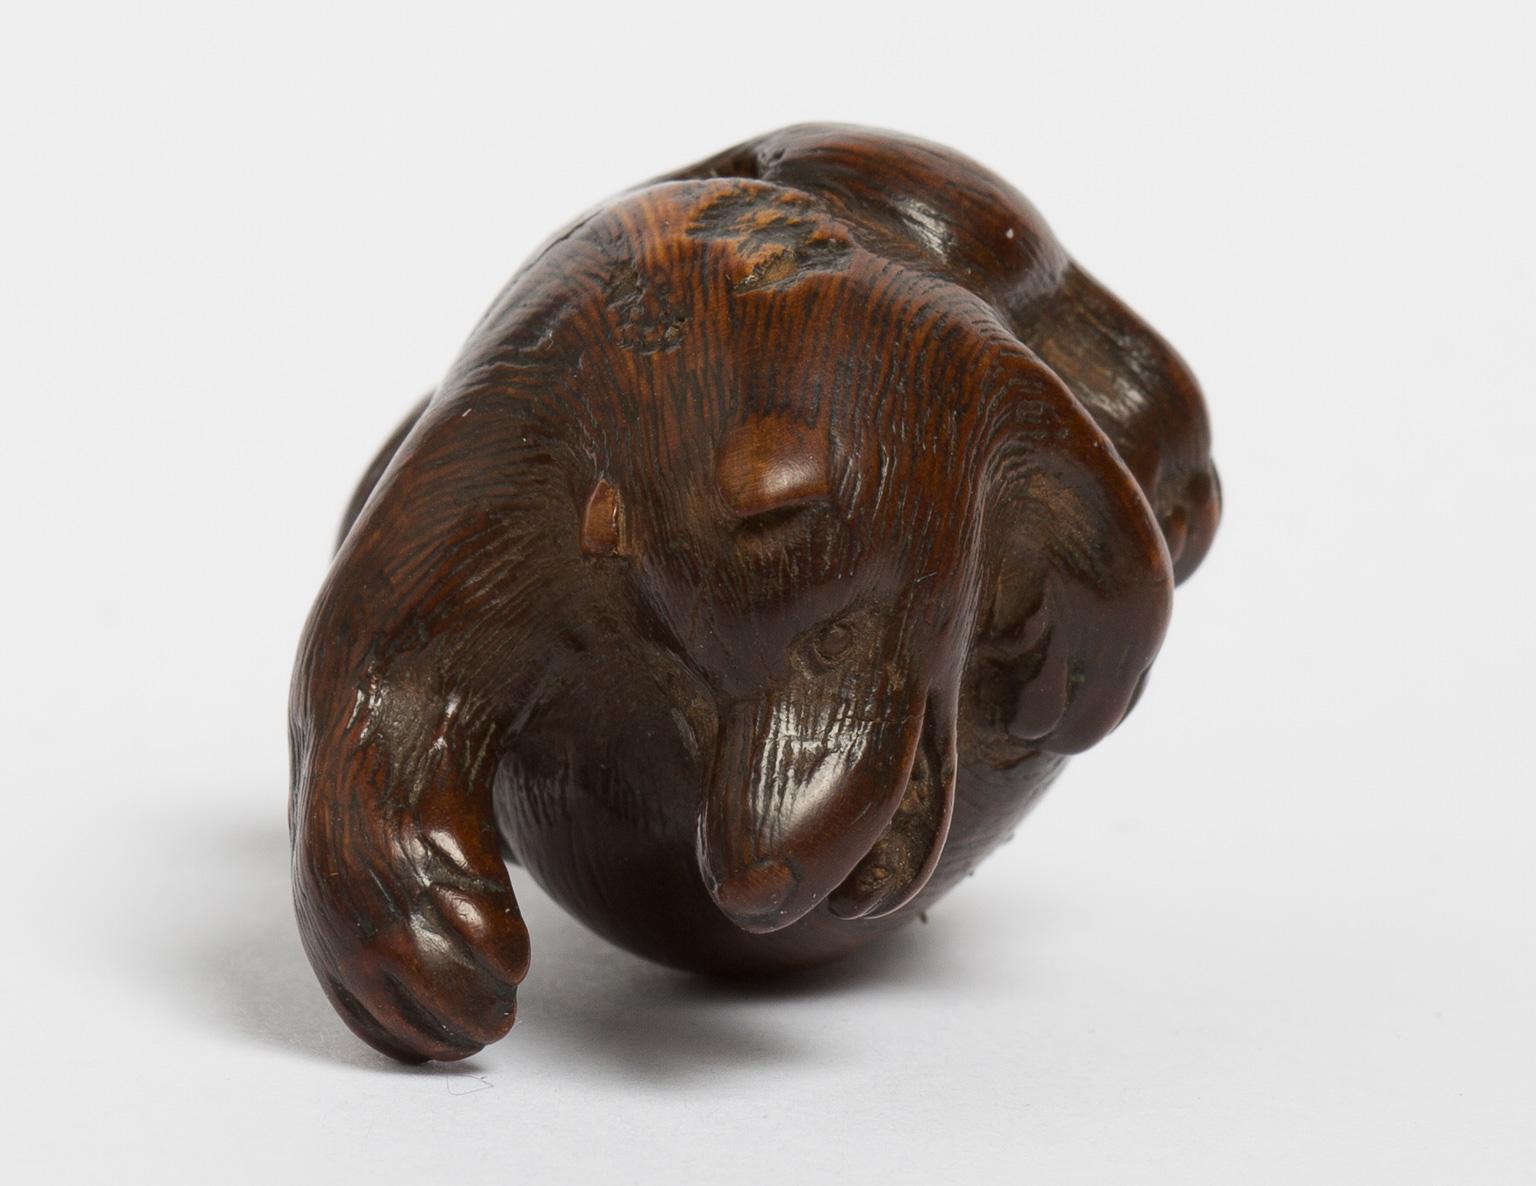 Carved Japanese Wooden Netsuke of a Tanuki 'Raccoon Dog' by Kokei, Early 19th Century